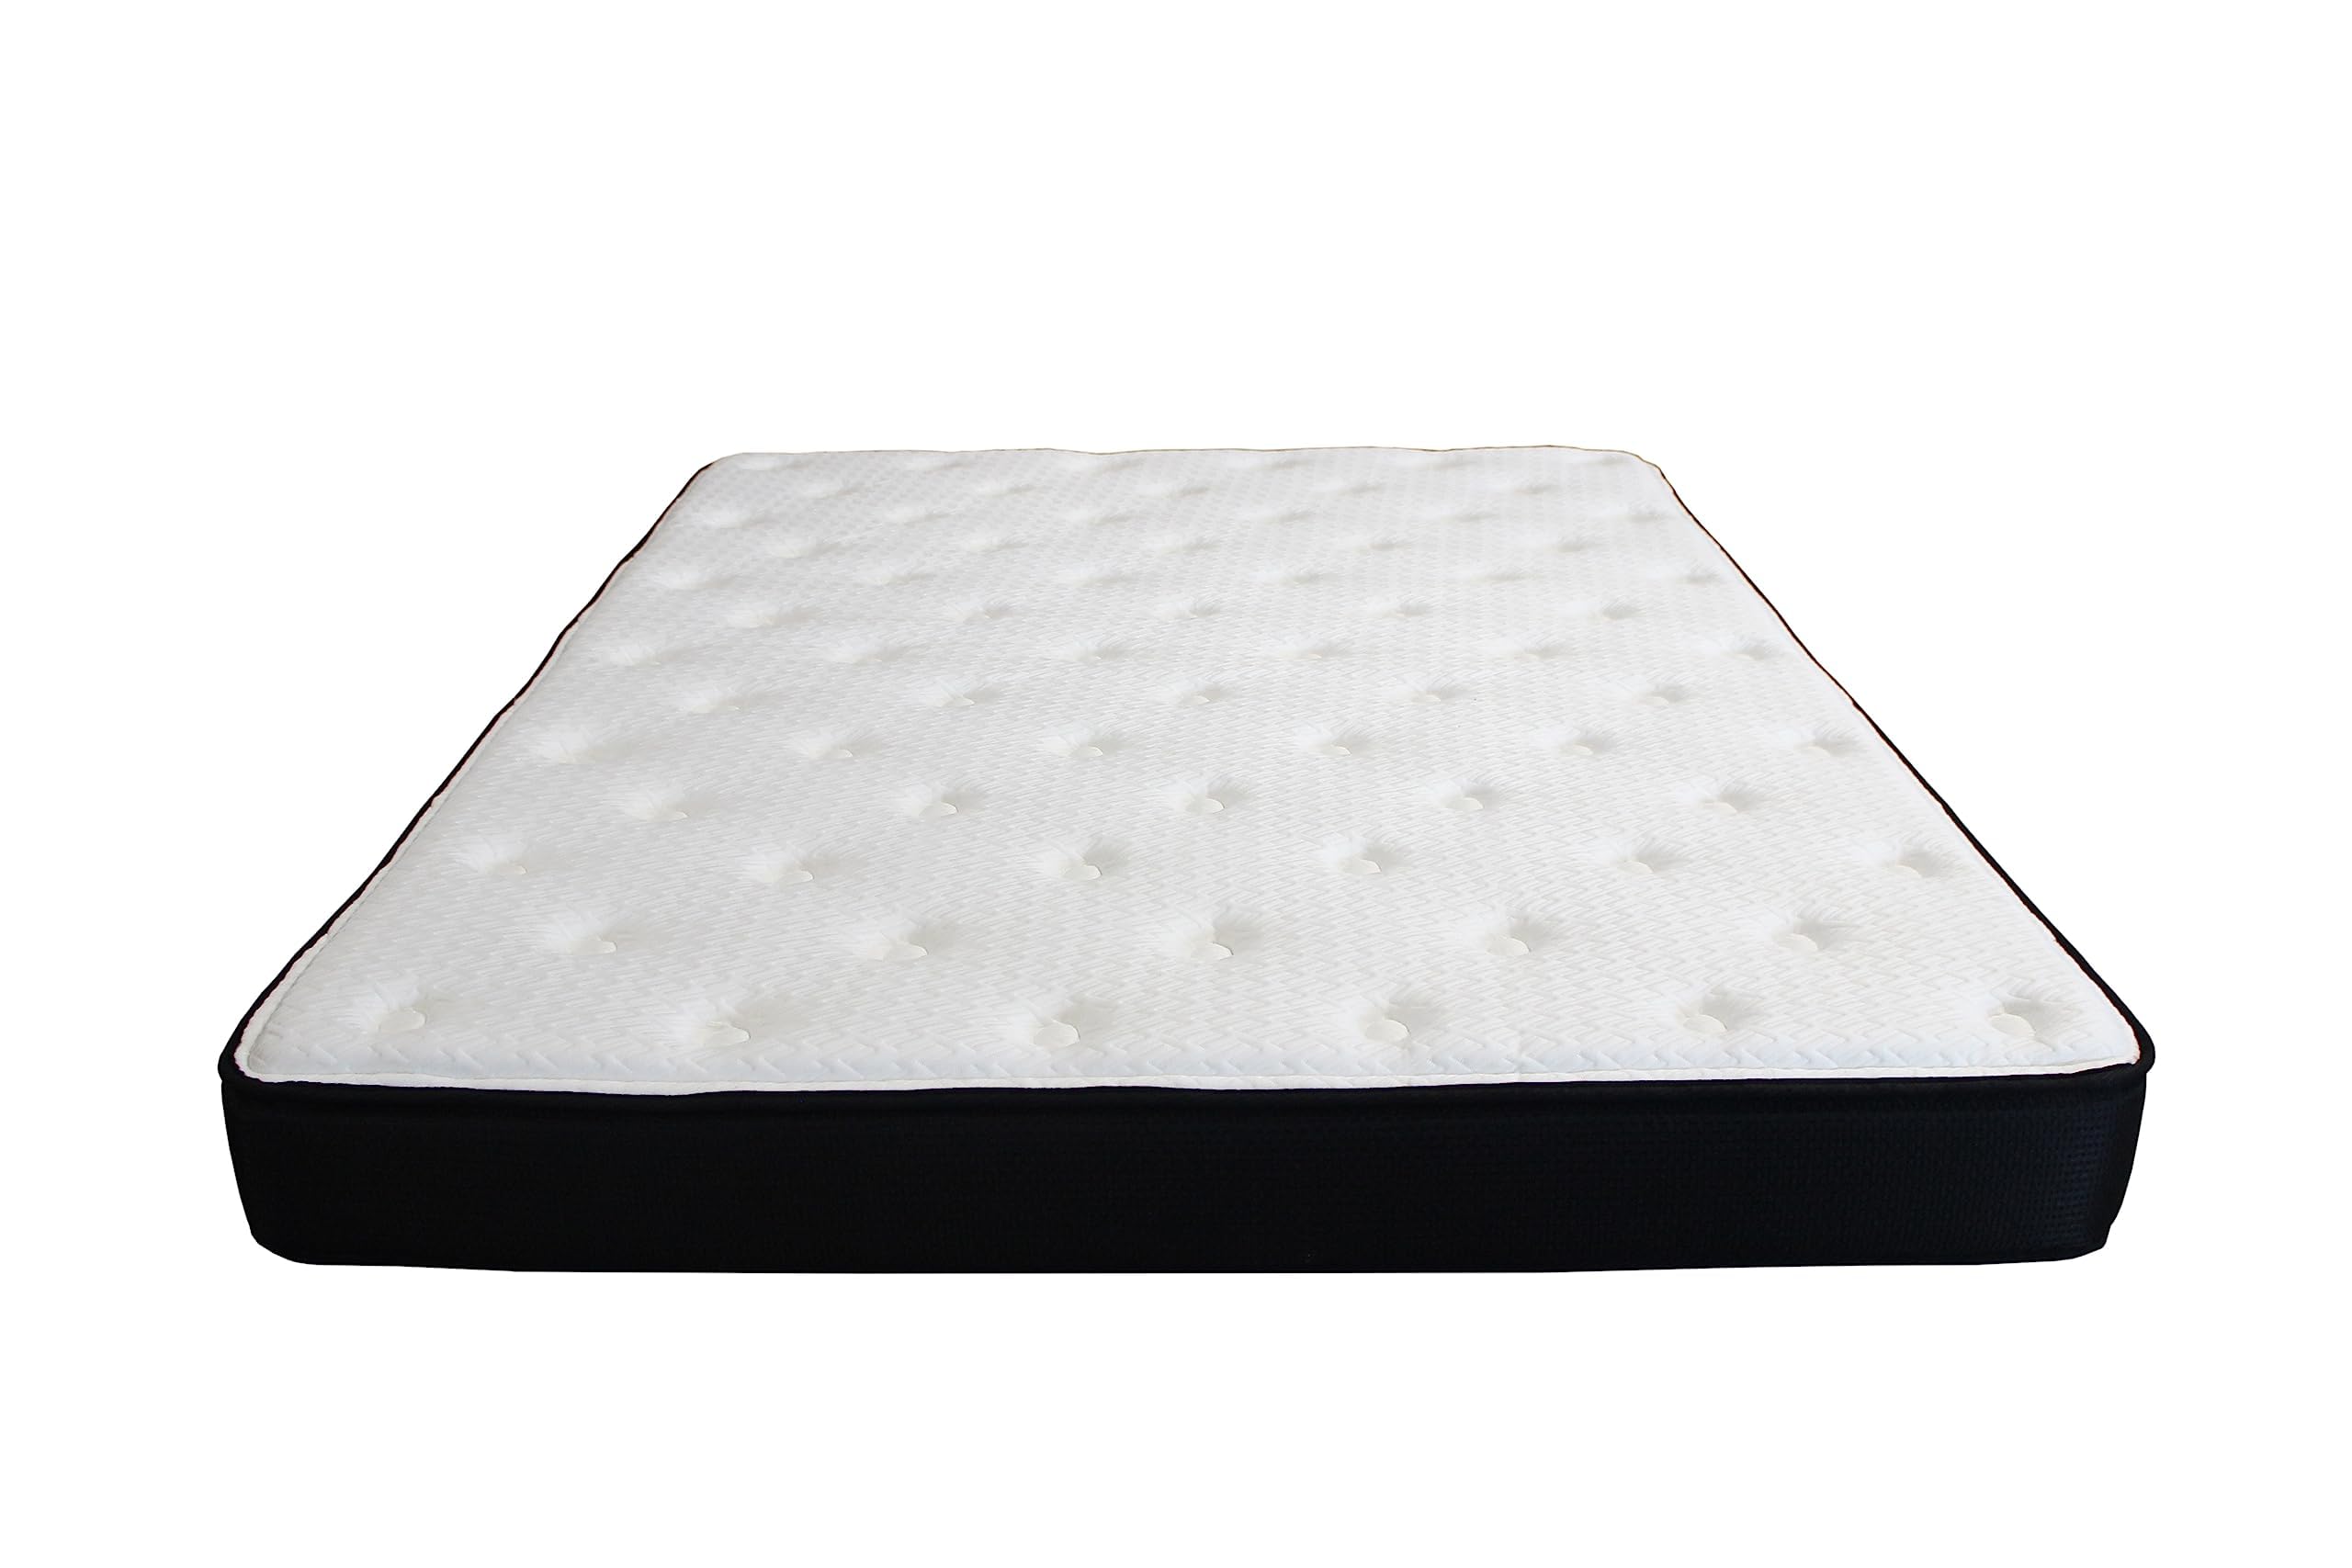 Triad Lite 6 inch RV Mattress Cool Gel Foam, Glacier Cooling Stretch Cover, Firm Support, Made in The USA (30x80)